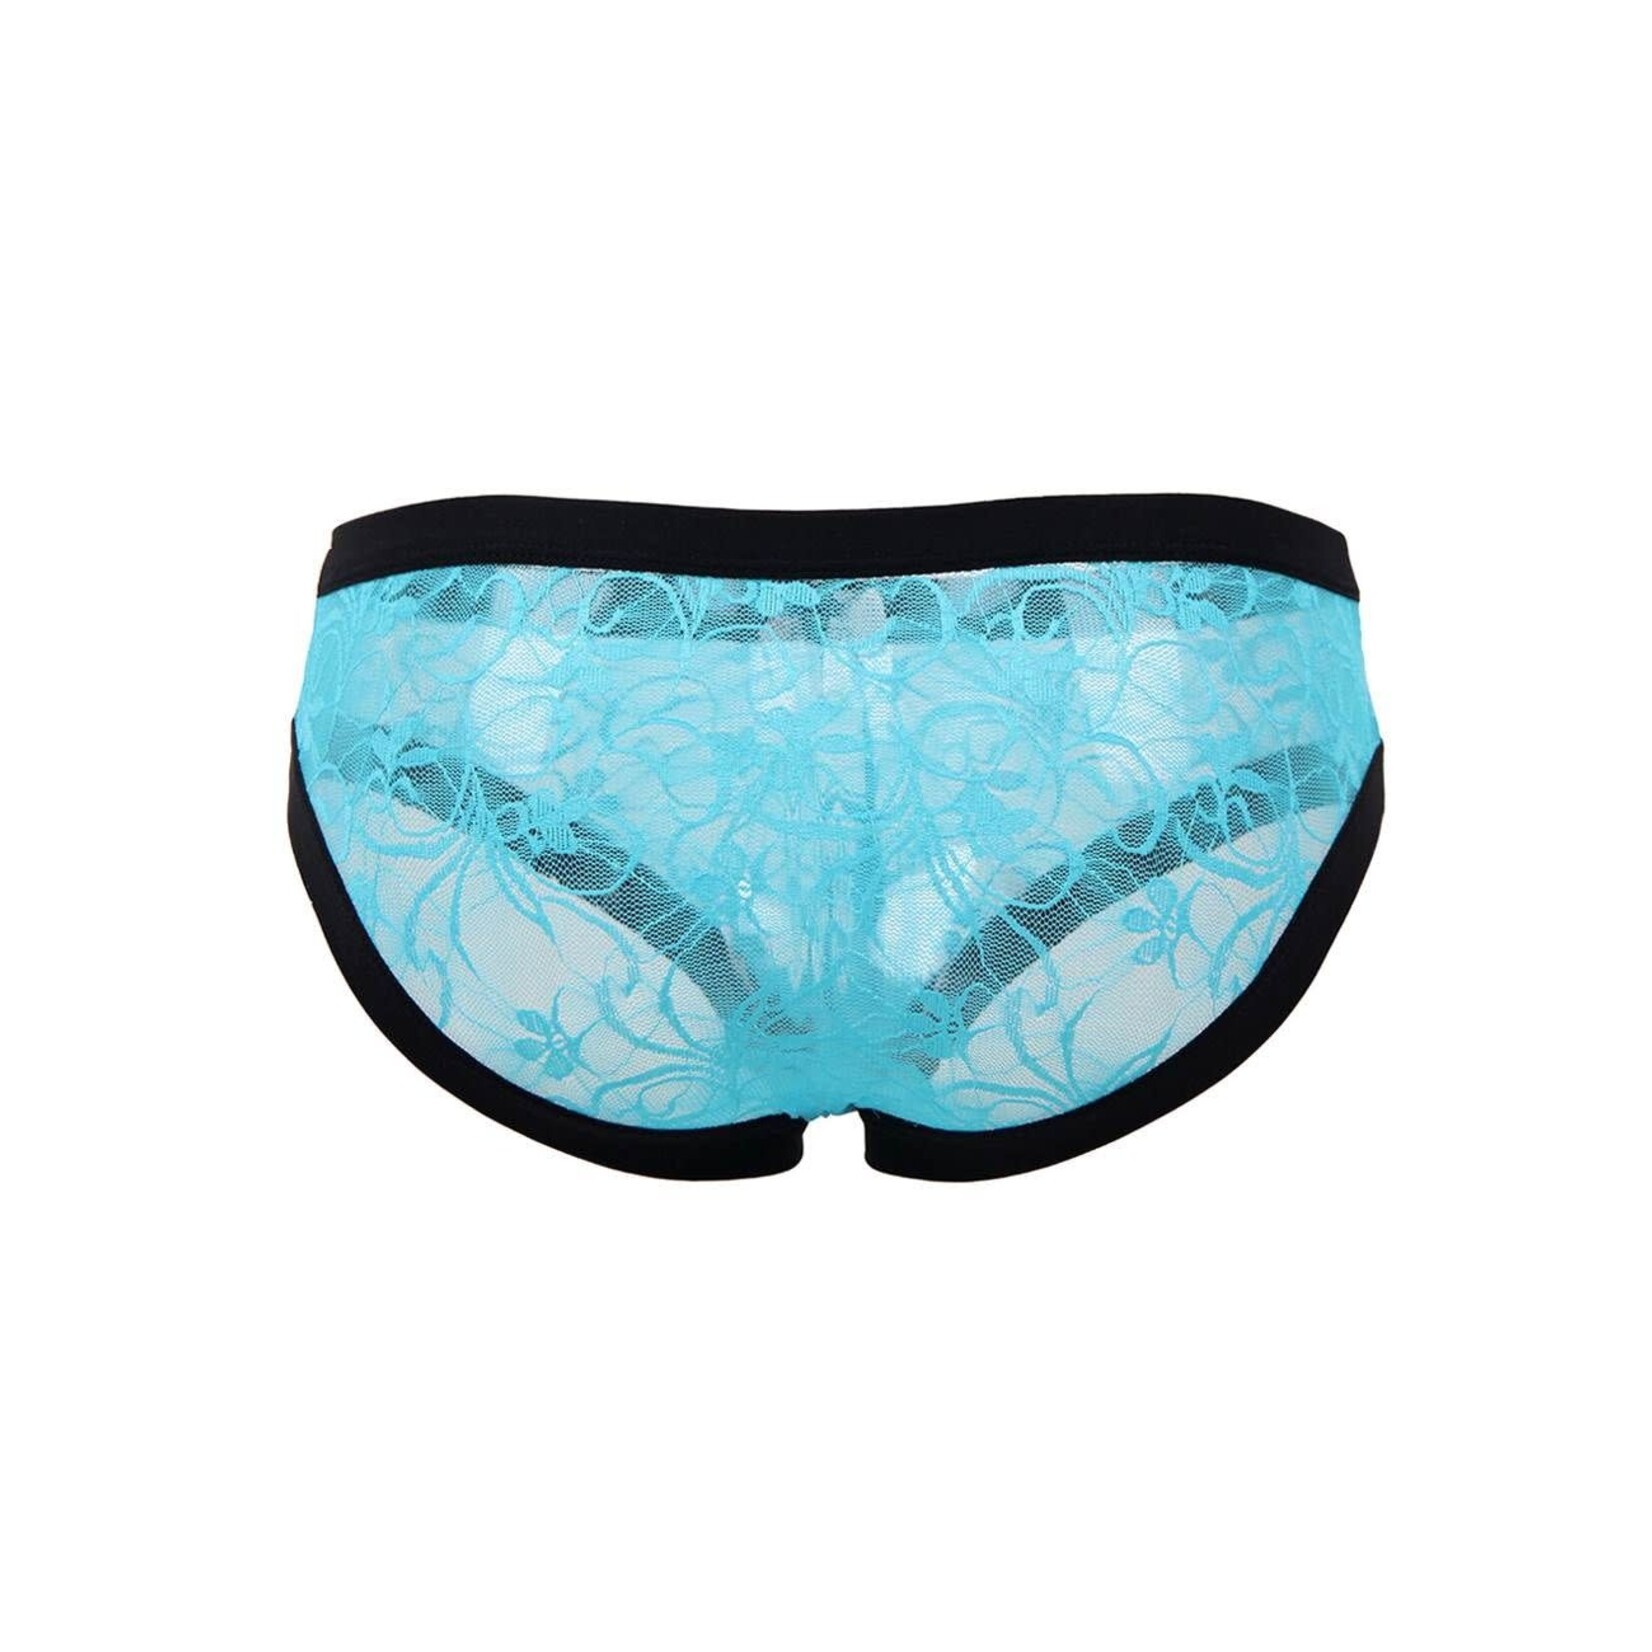 OH YEAH! -  SEXY BLUE LACE PANTY FOR MEN L